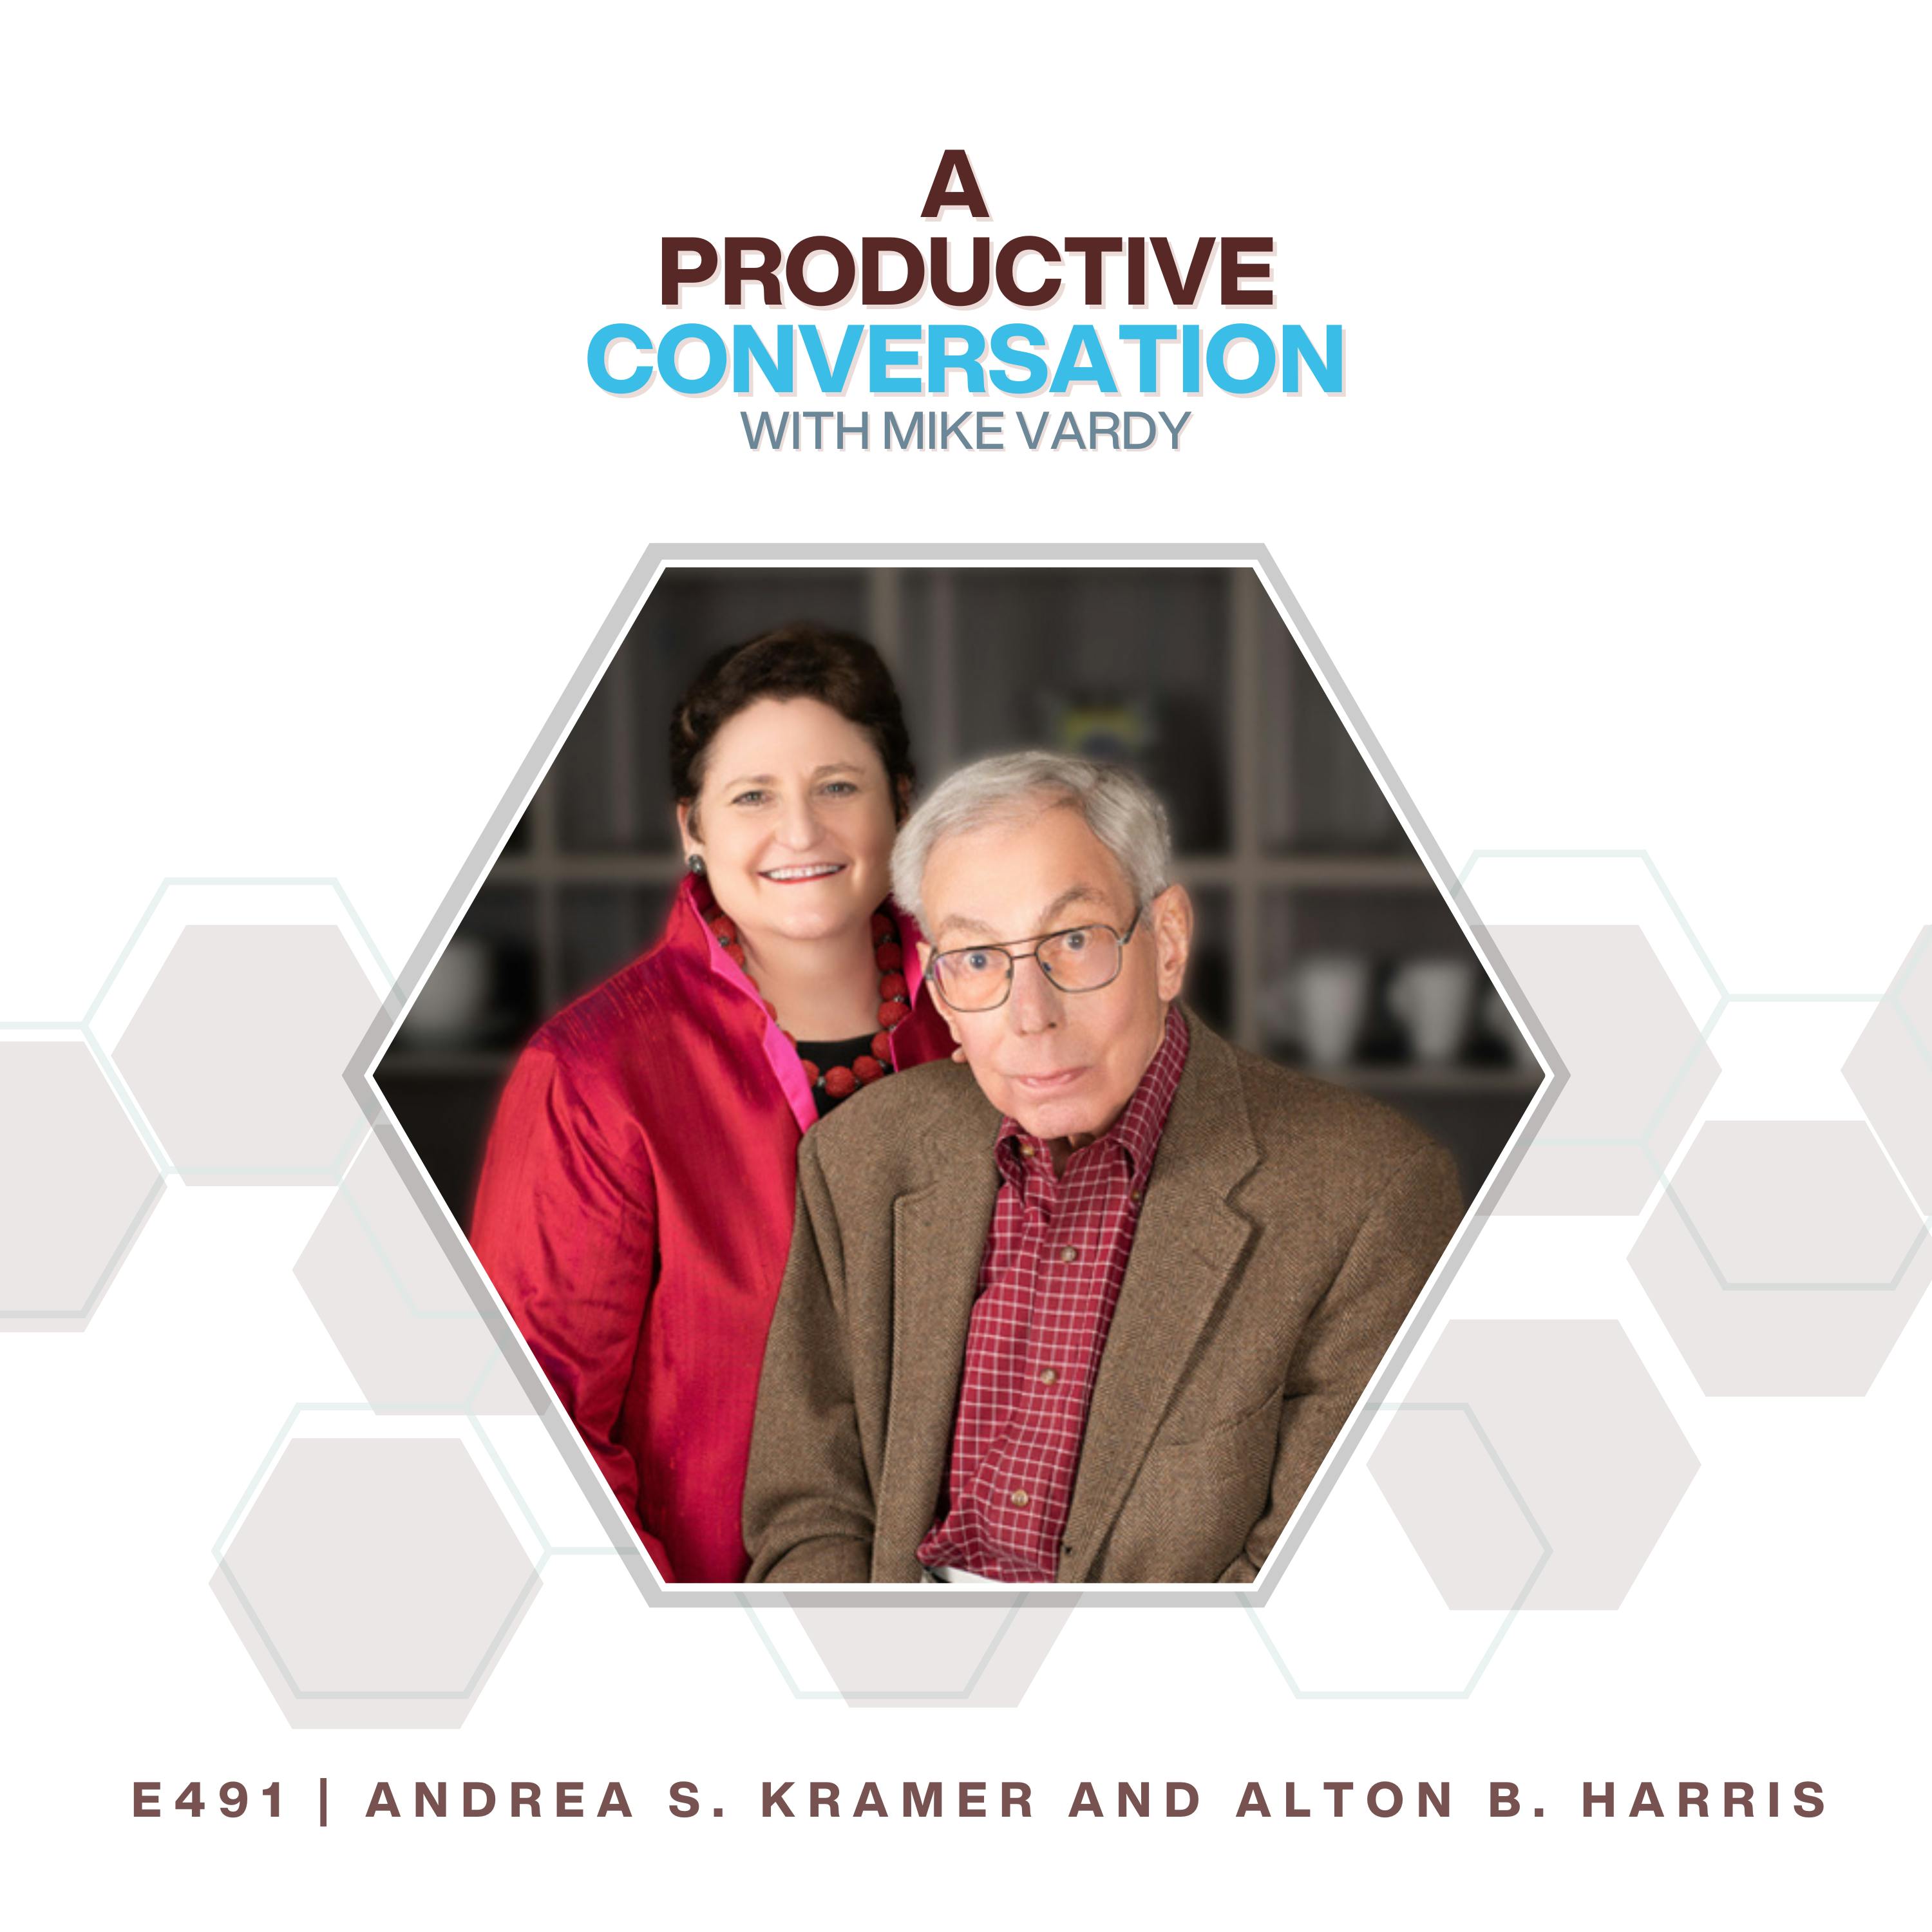 Andrea S. Kramer And Alton B. Harris Talk About Combatting Workplace Bias